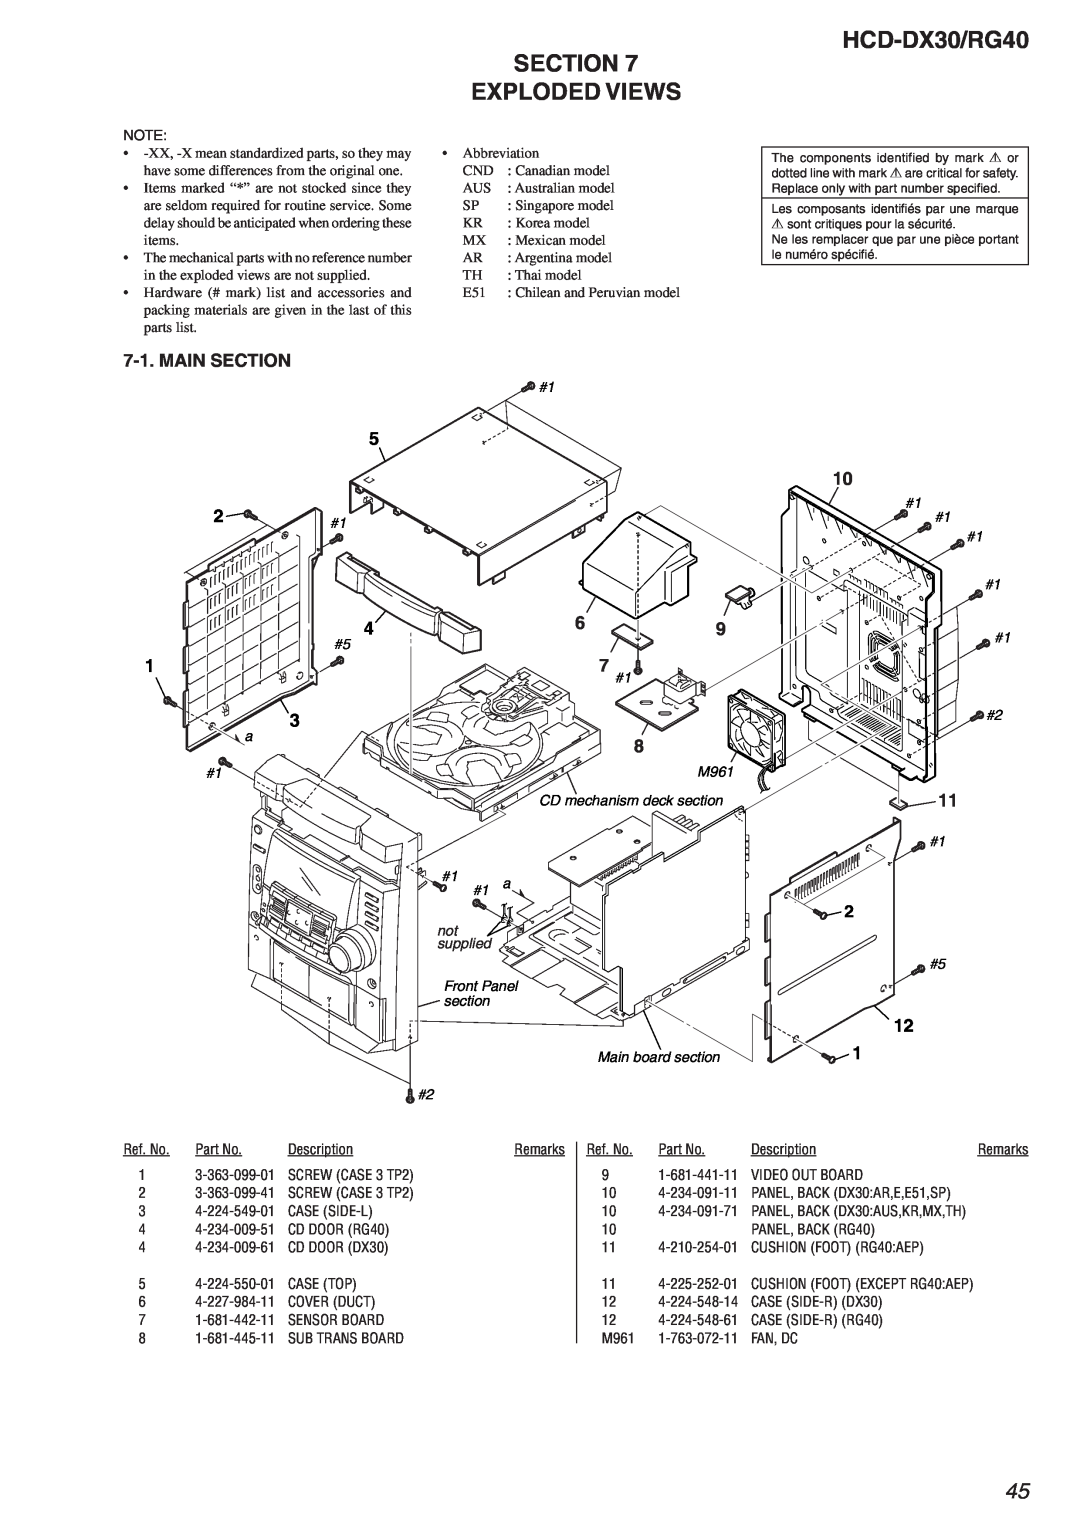 Sony HCD-RG40 specifications Section, Exploded Views, HCD-DX30/RG40 